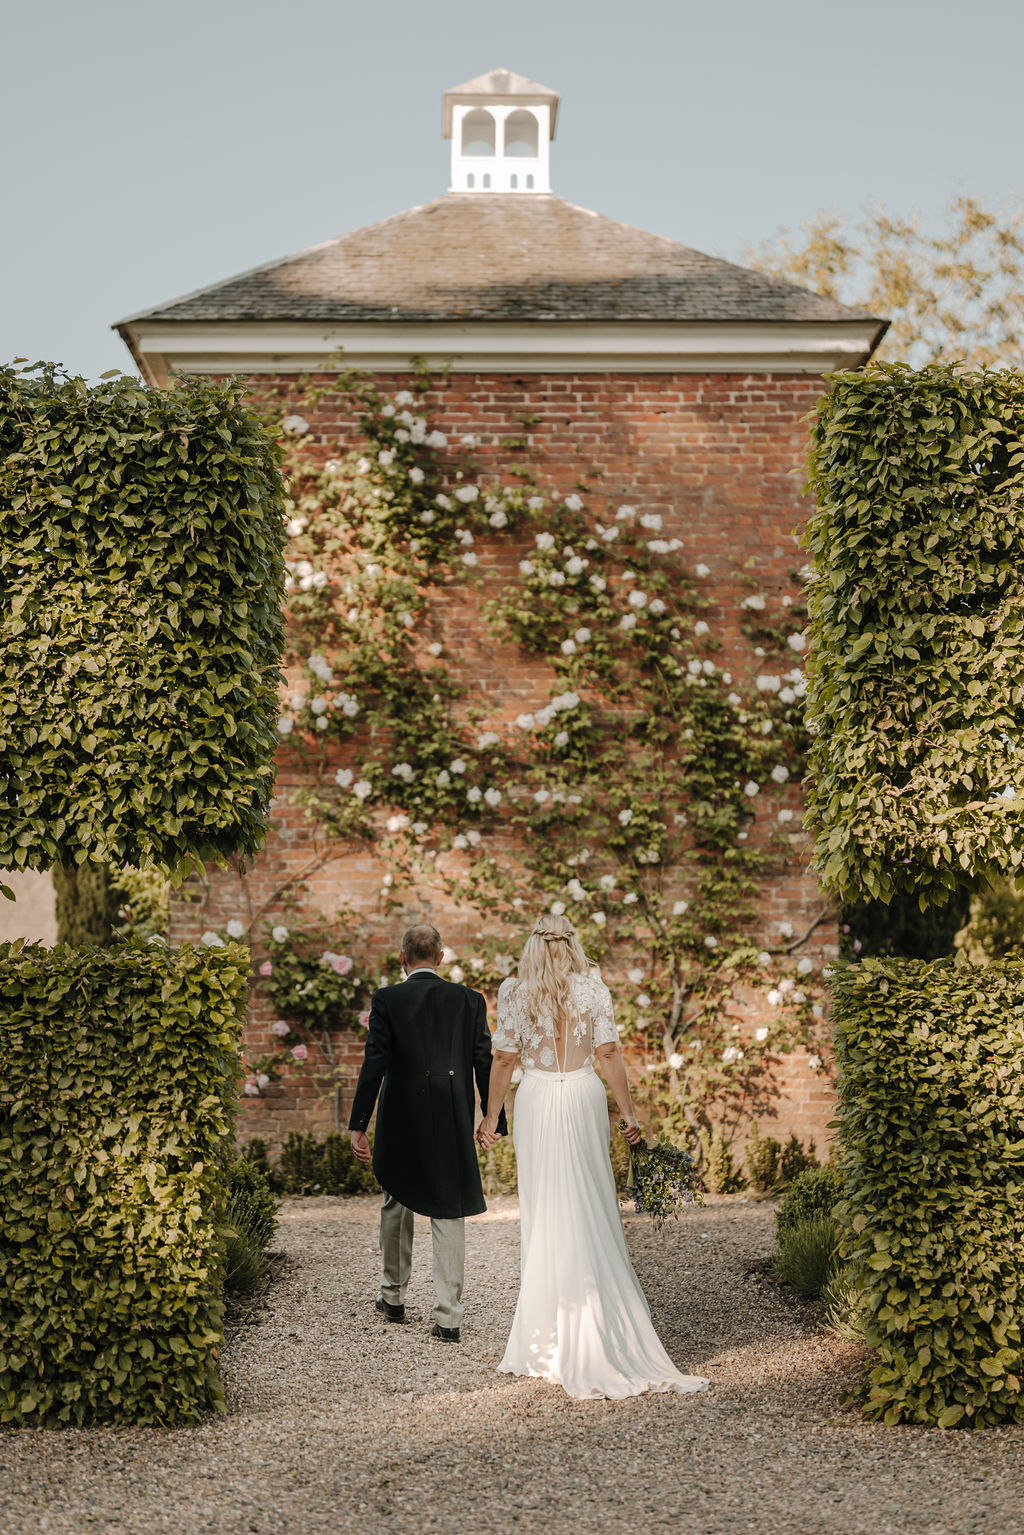 A bride and groom walk away from the camera along a gravel path with a red brick building in the background covered with a white climbing rose